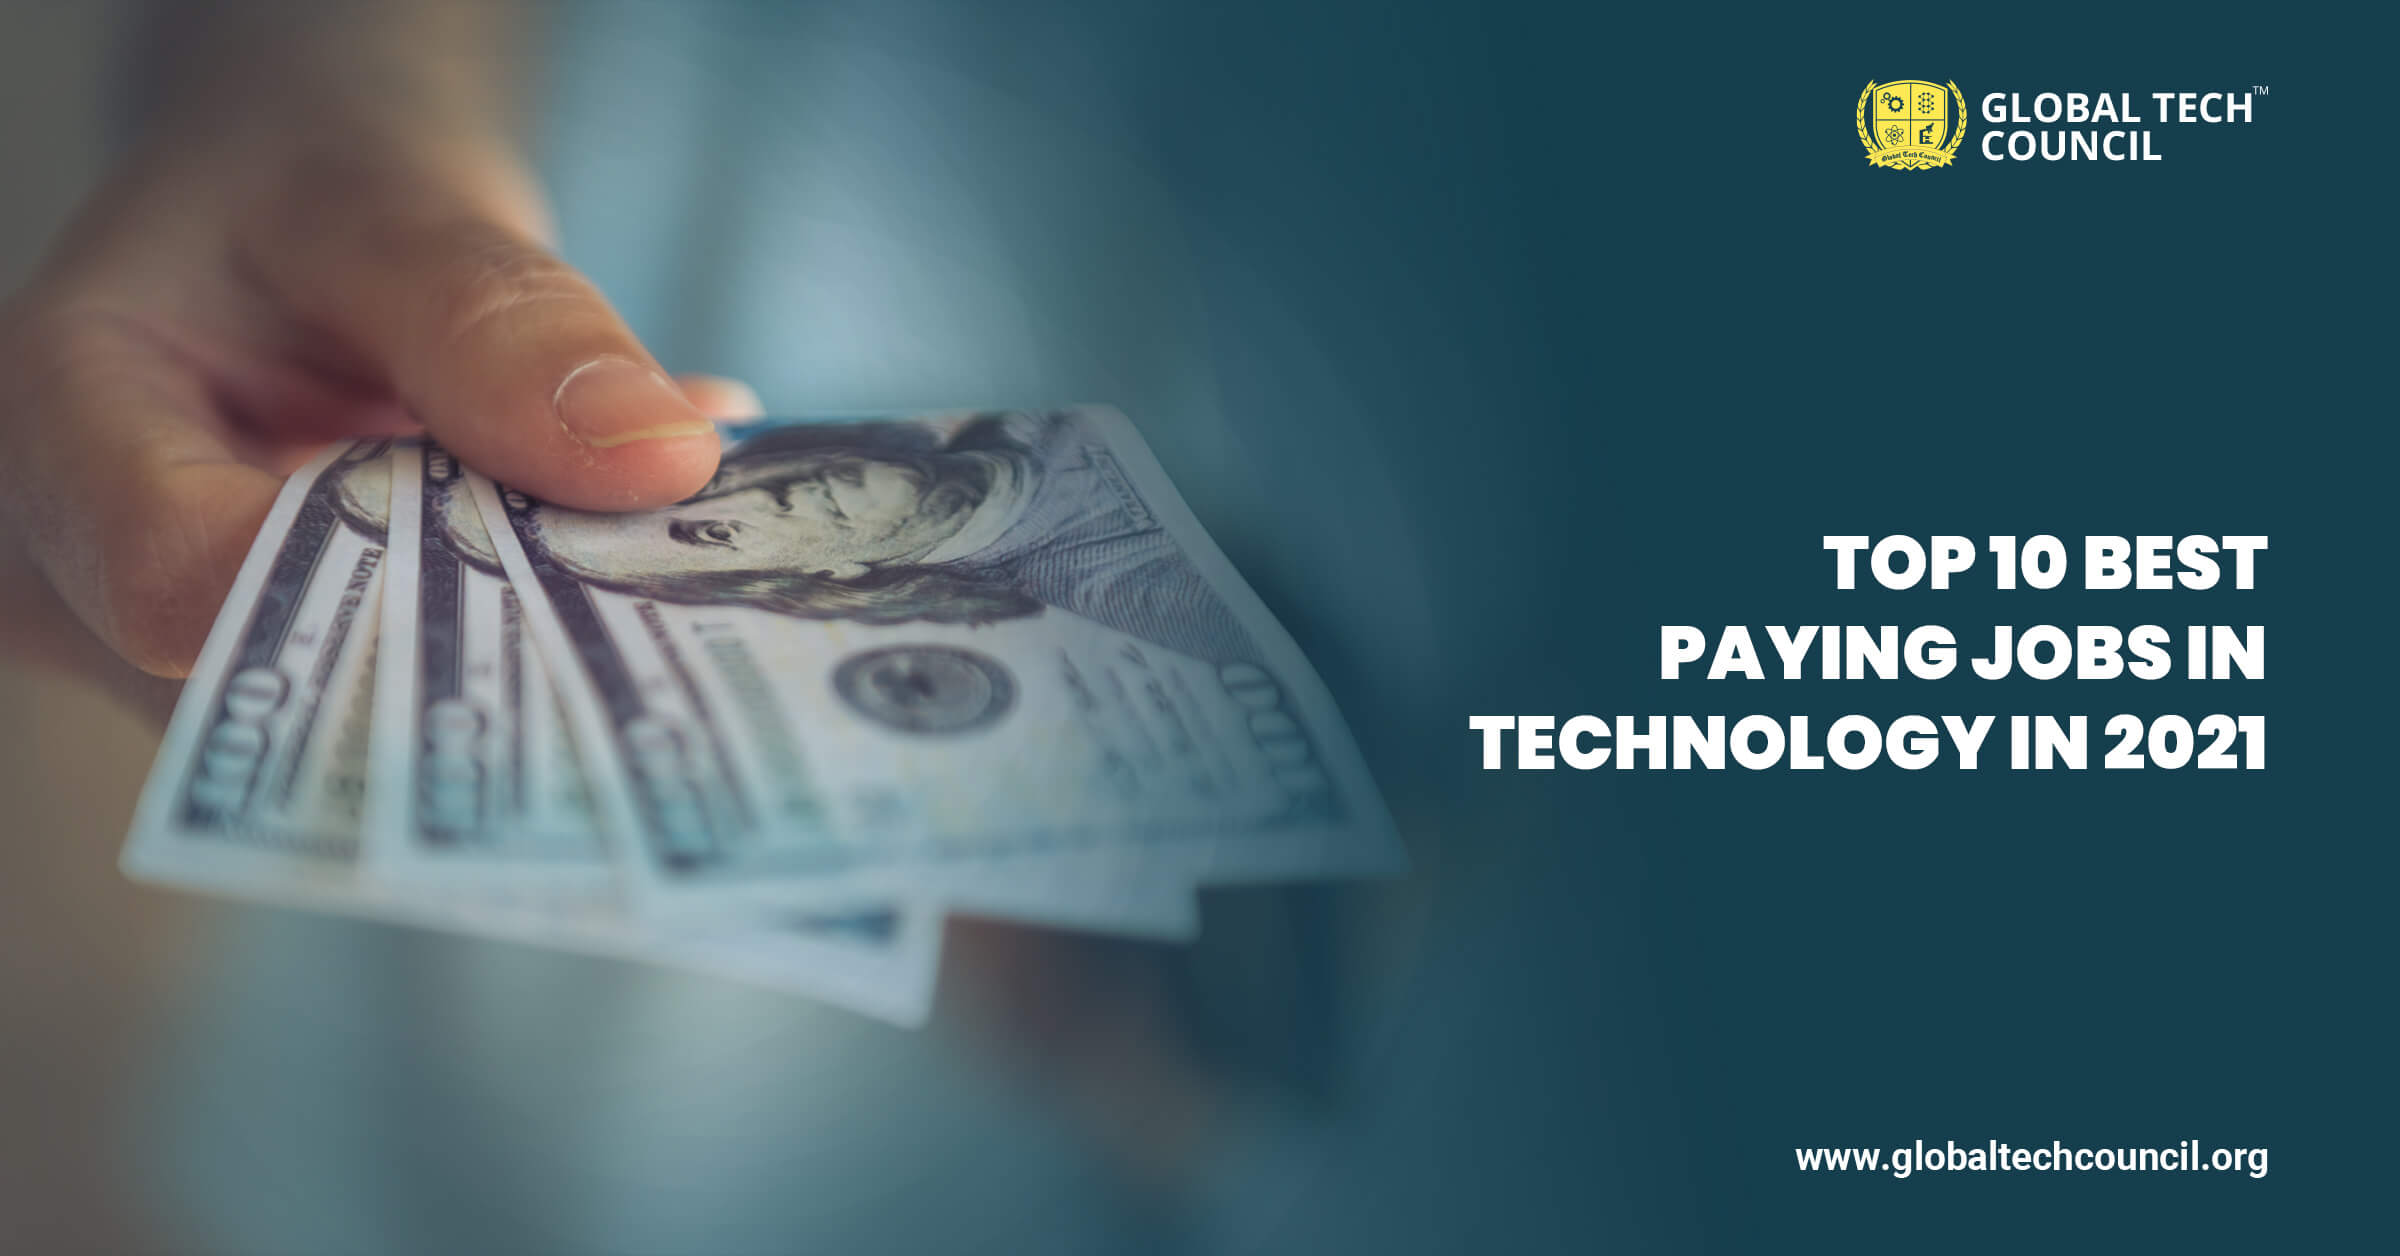 Top 10 Best Paying Jobs in Technology in 2021